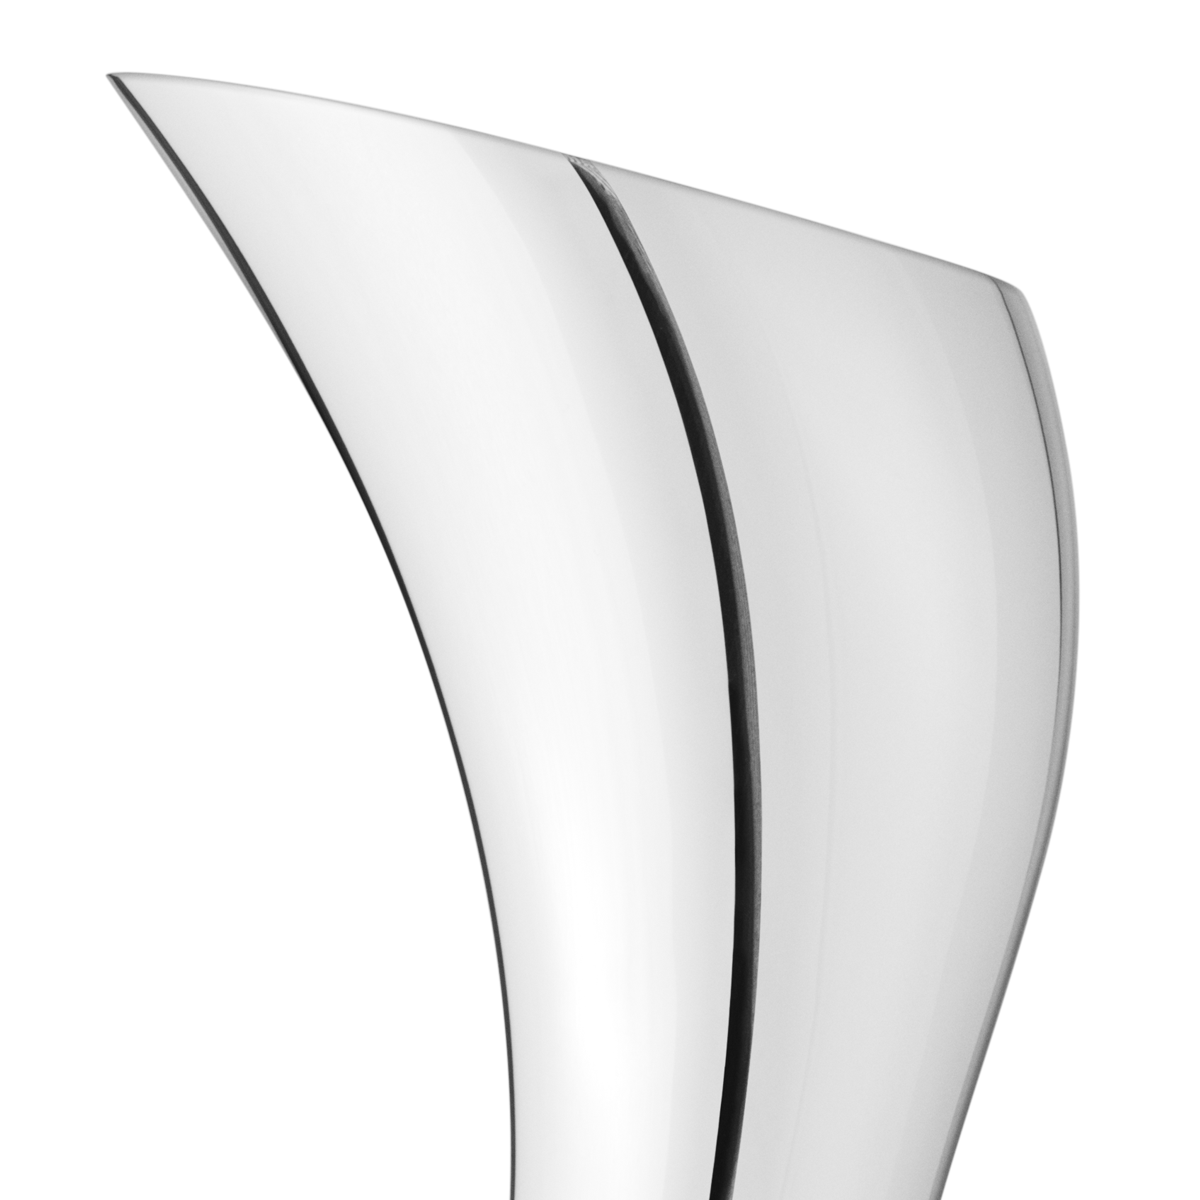 COBRA iconic curved pitcher in stainless steel | Georg Jensen